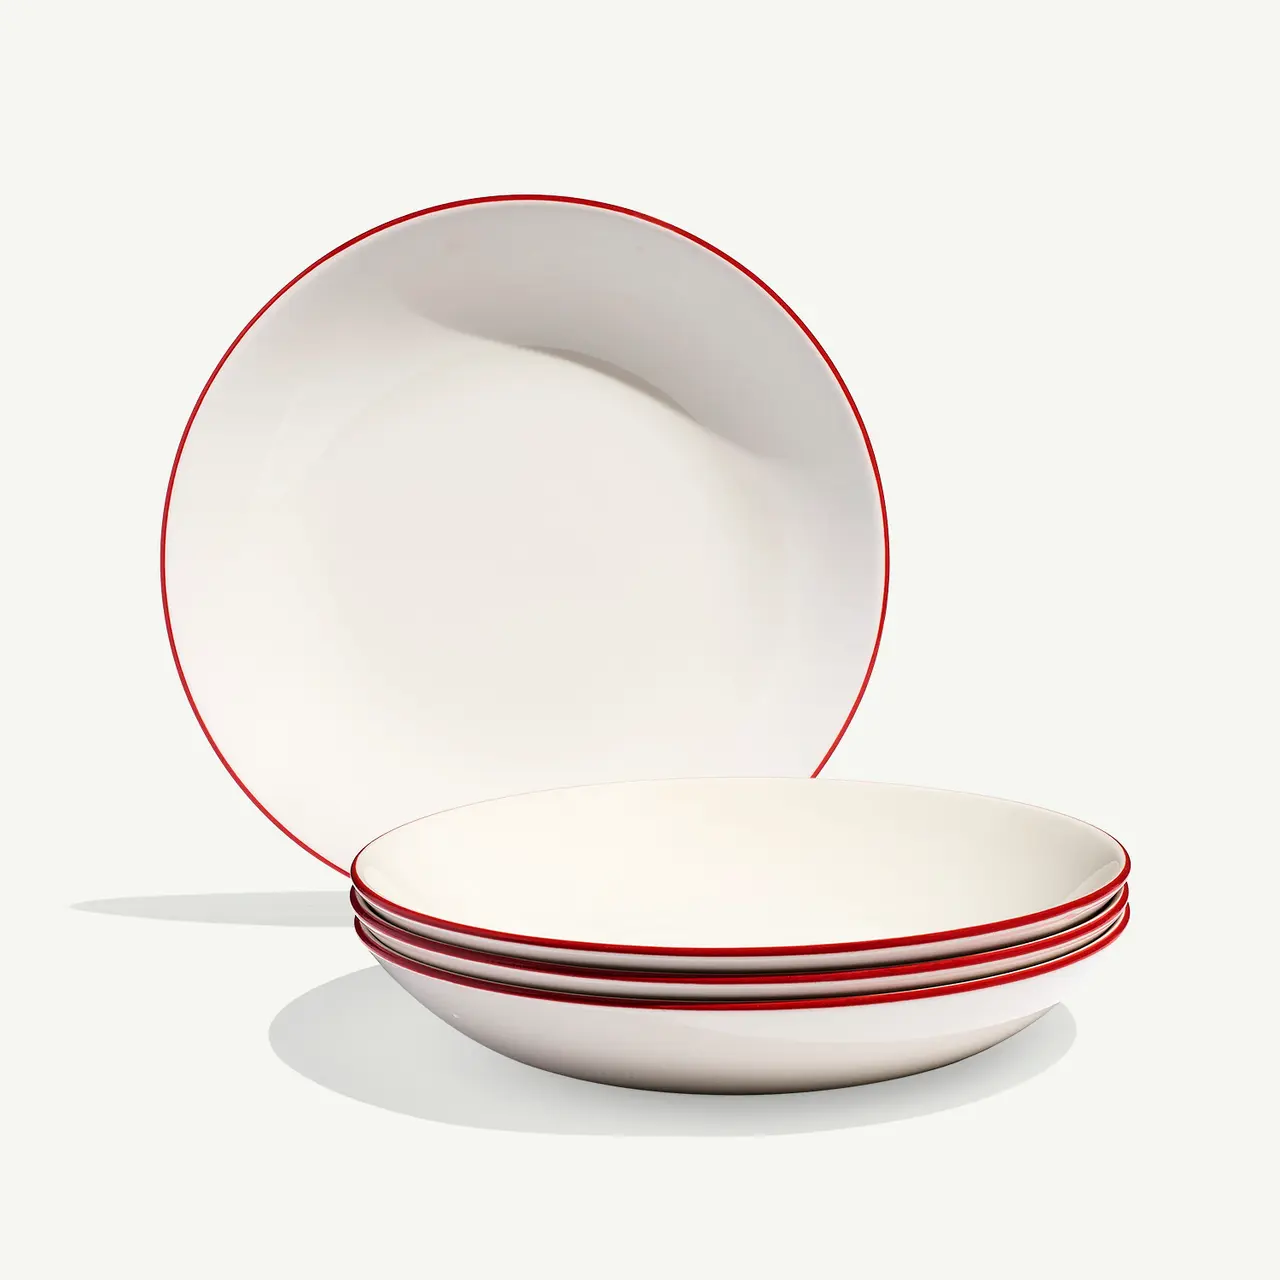 Two white bowls with red trim are stacked with one tilted upright against the other on a light background.